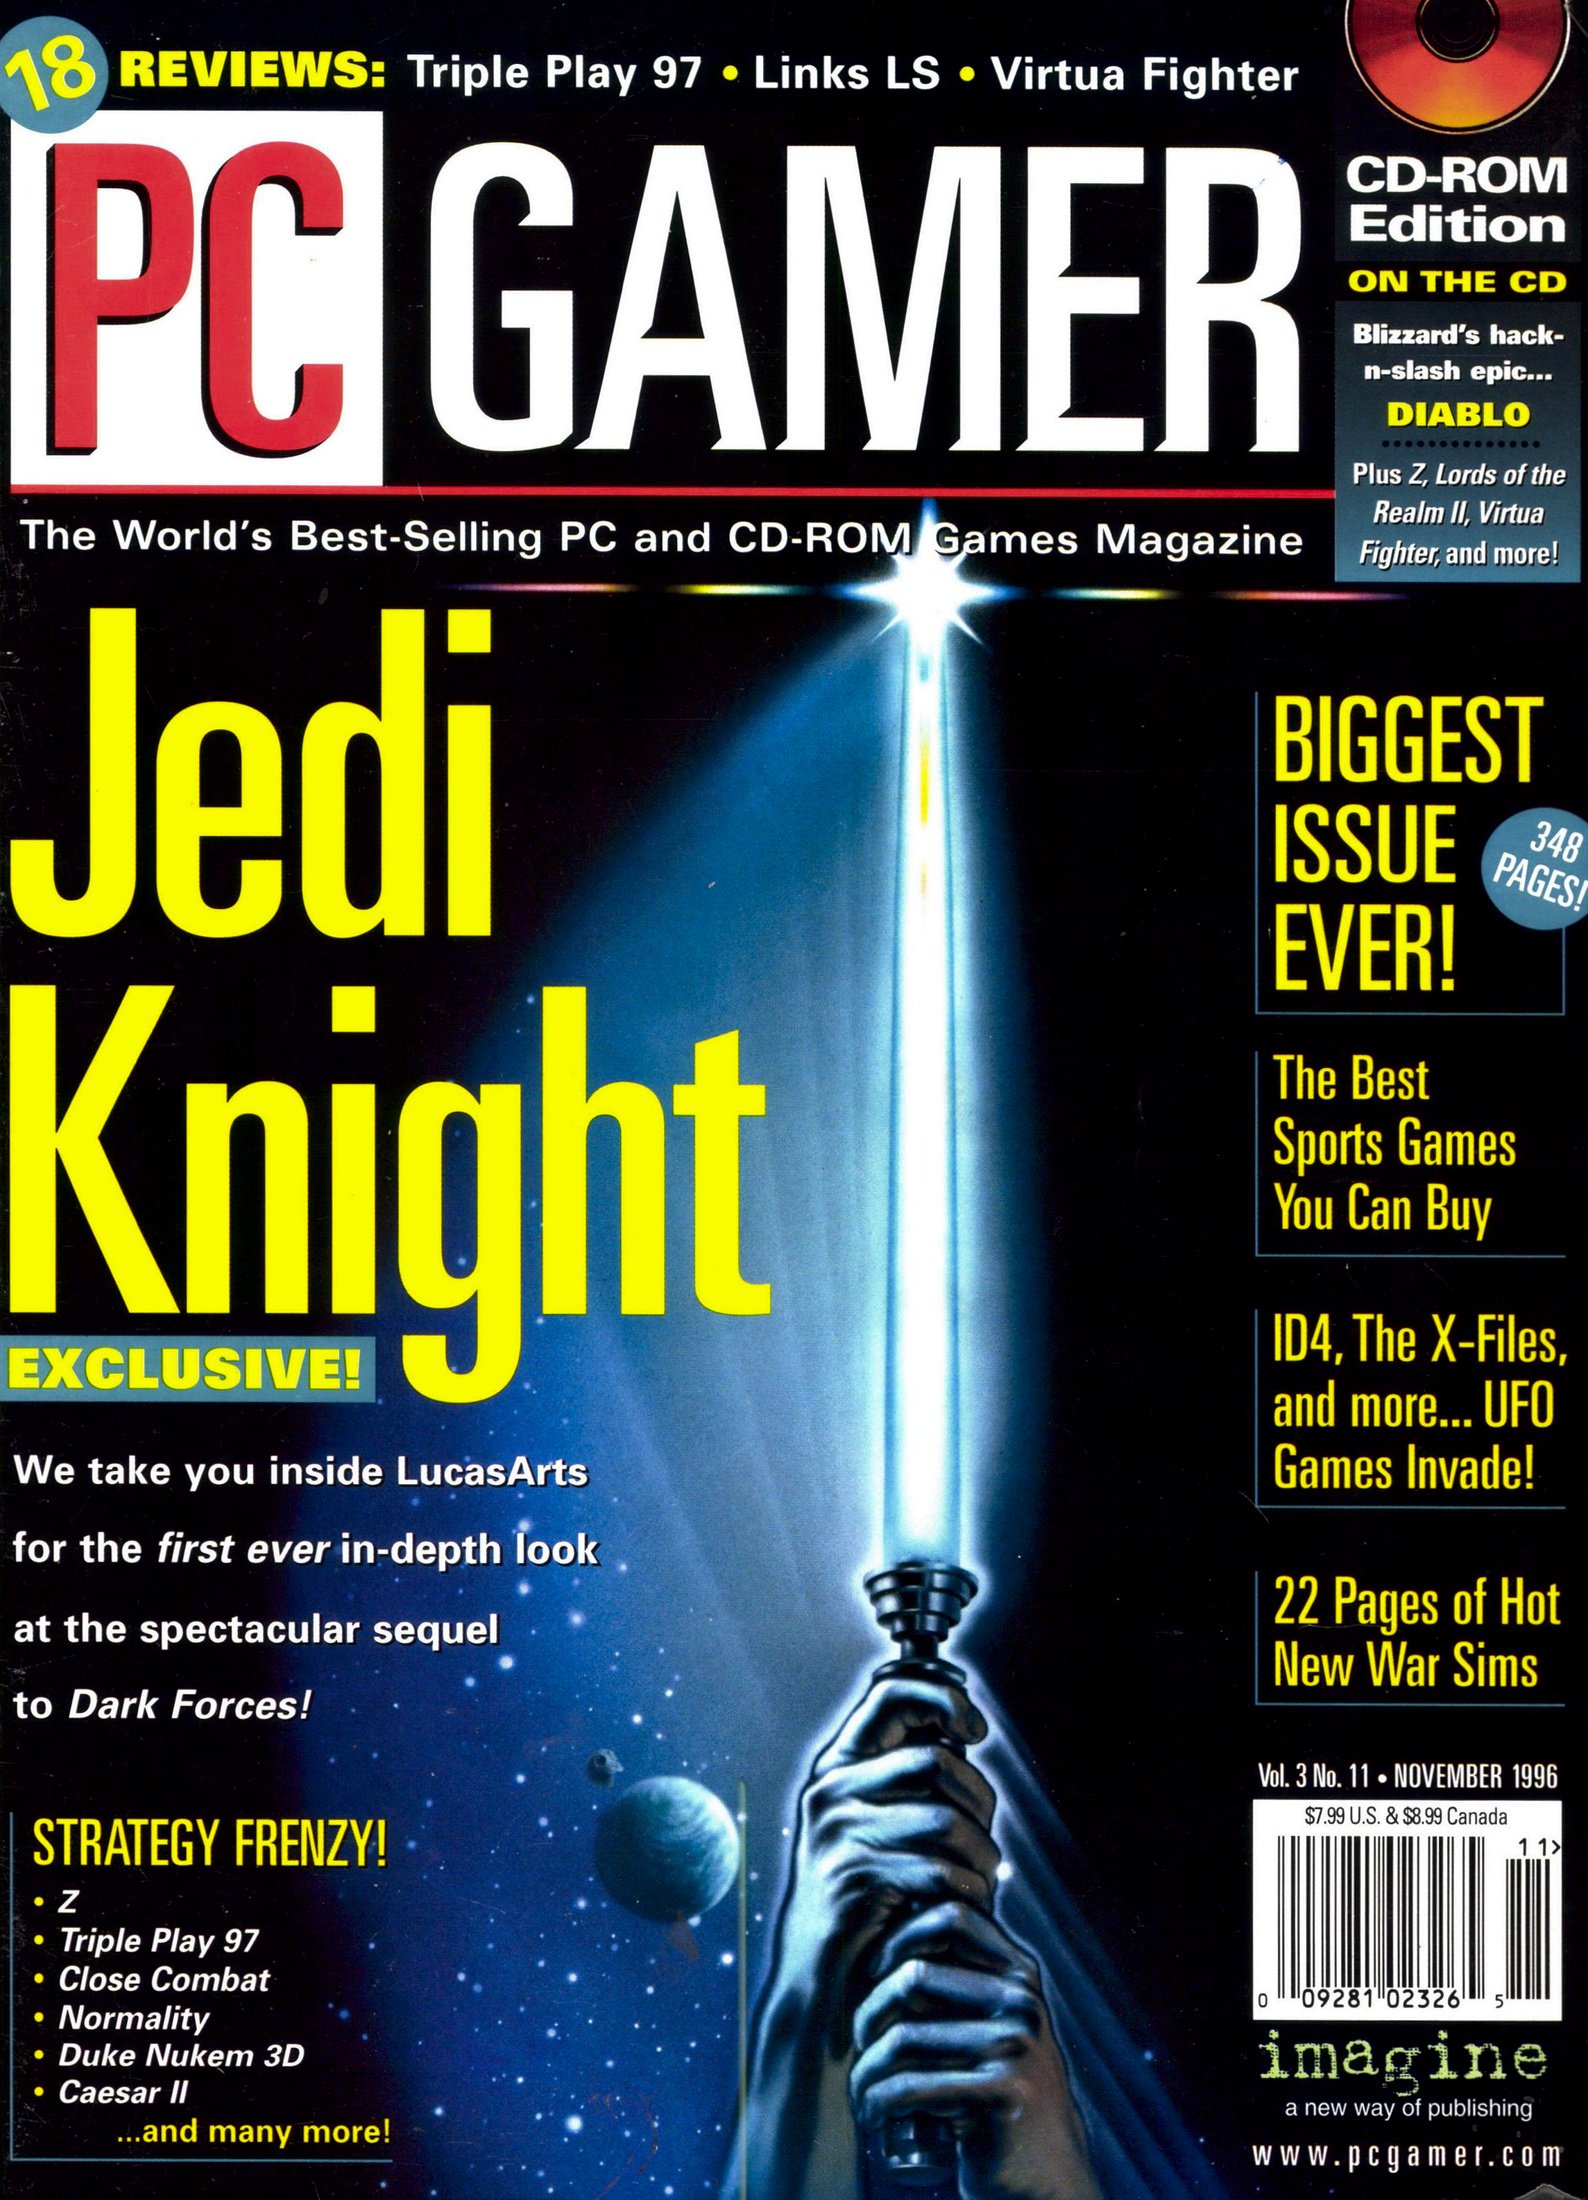 More information about "PC Gamer Issue 030 (November 1996)"